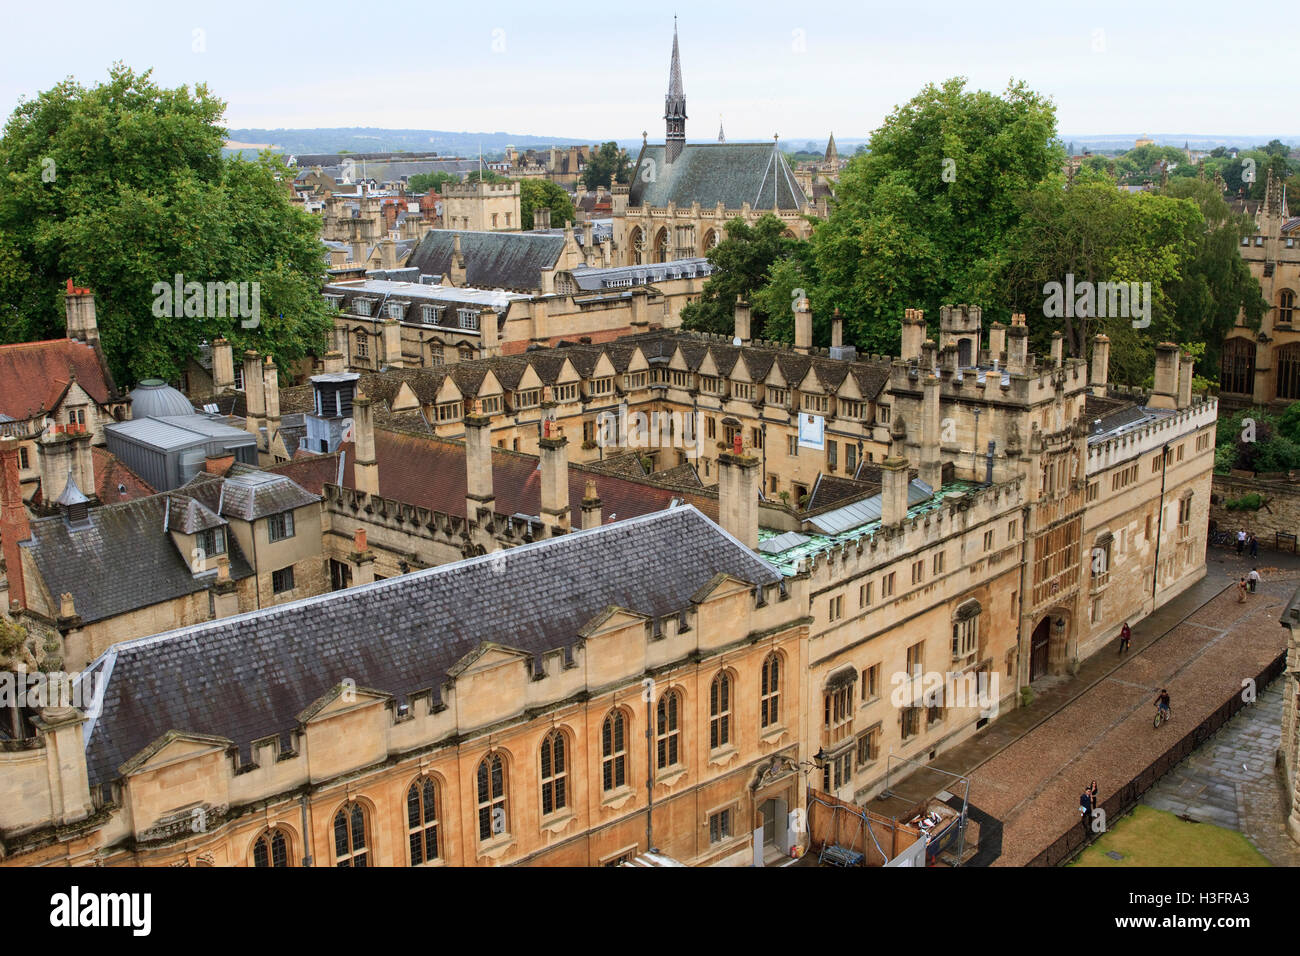 View from the University Church of St Mary the Virgin, Oxford, England, looking towards Exeter College. Stock Photo